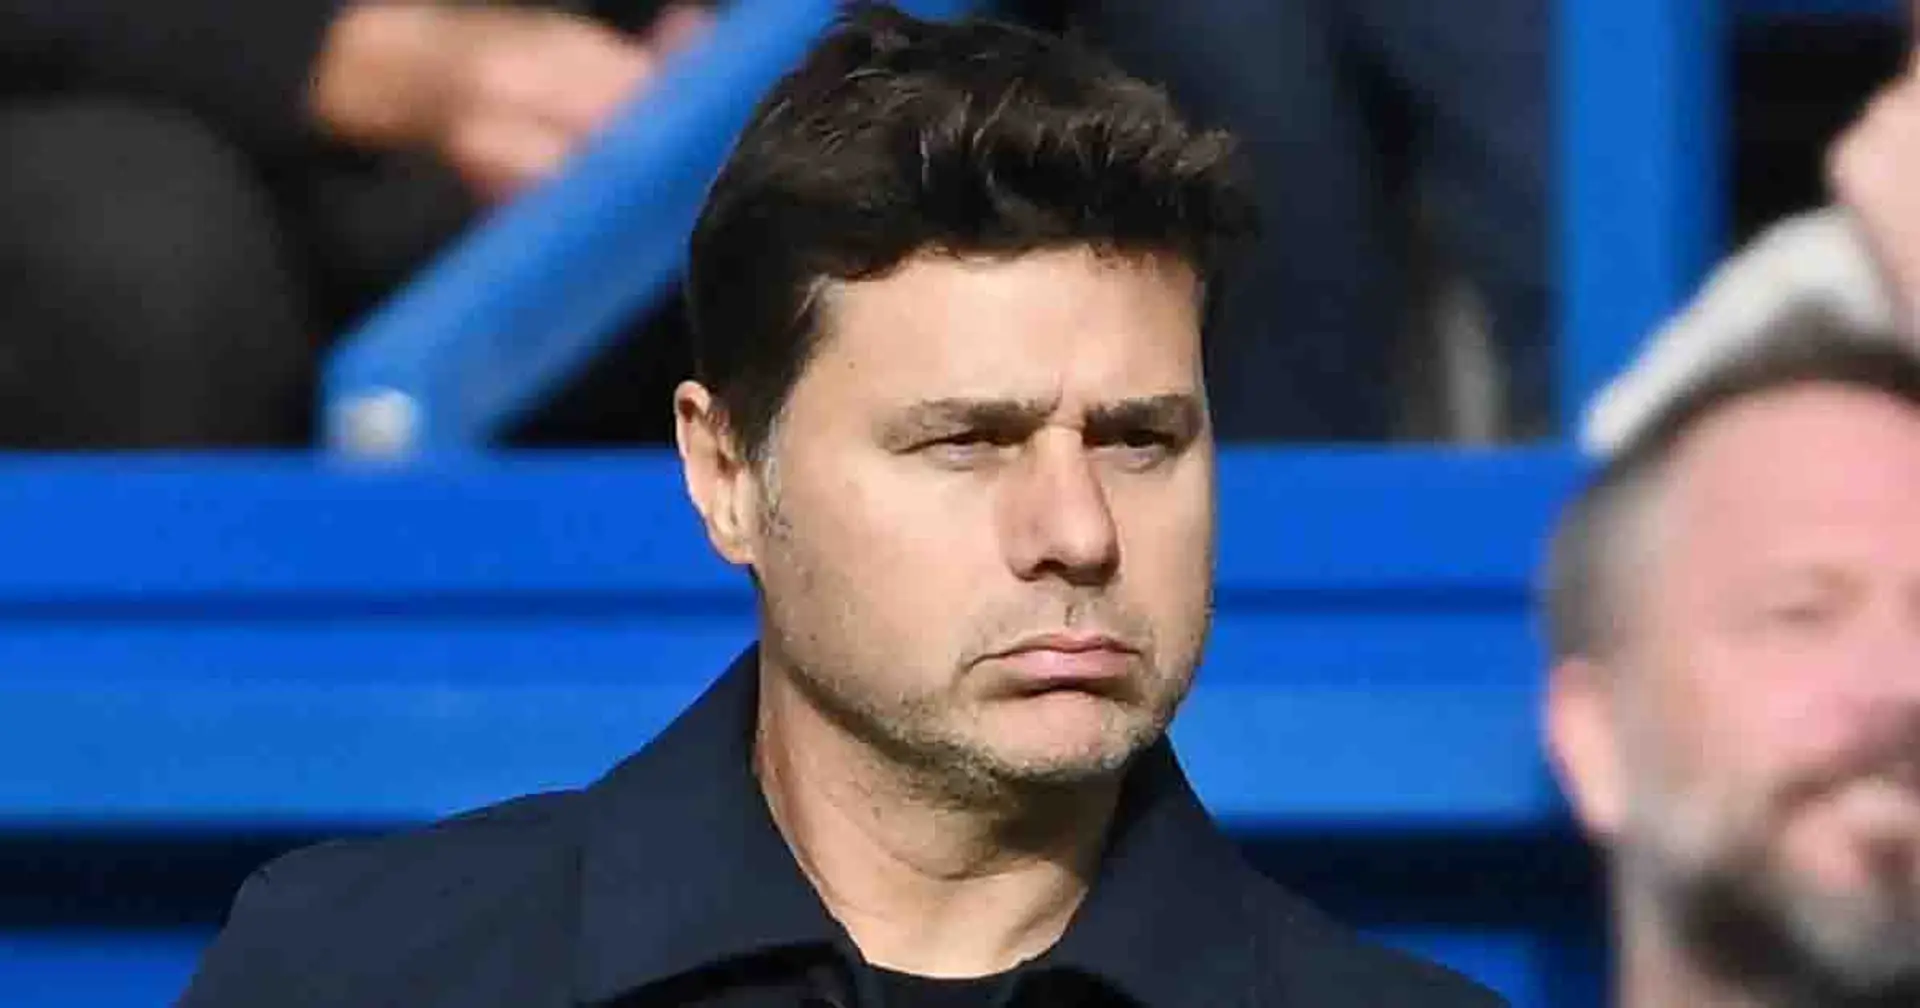 'Beyond infuriating': Chelsea fans angry with Poch over one starting XI decision